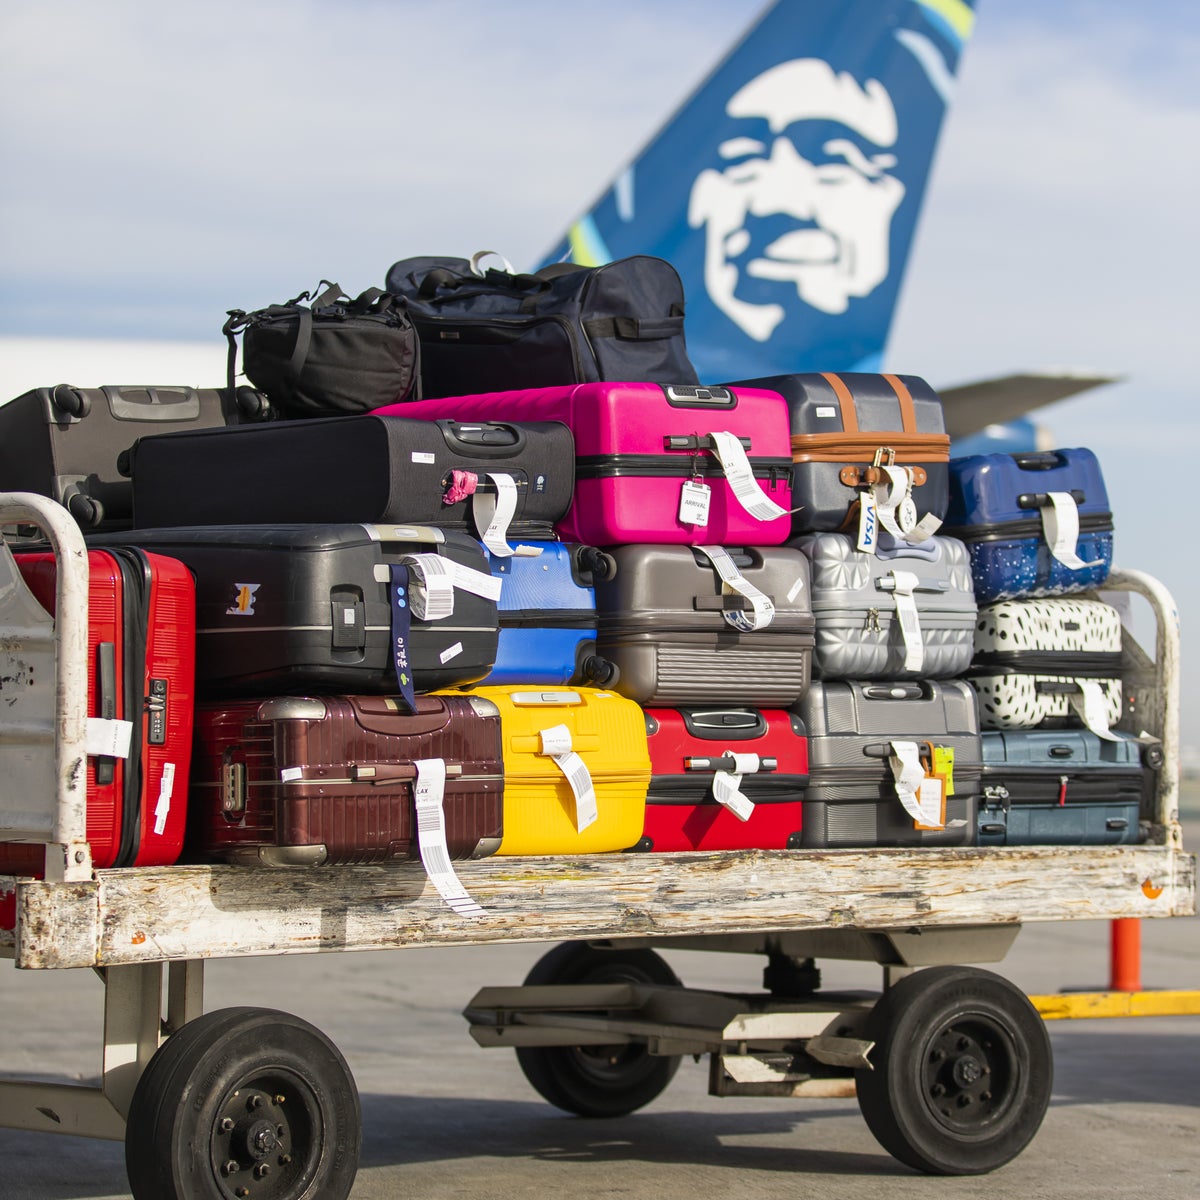 Checked baggage on Alaska Airlines